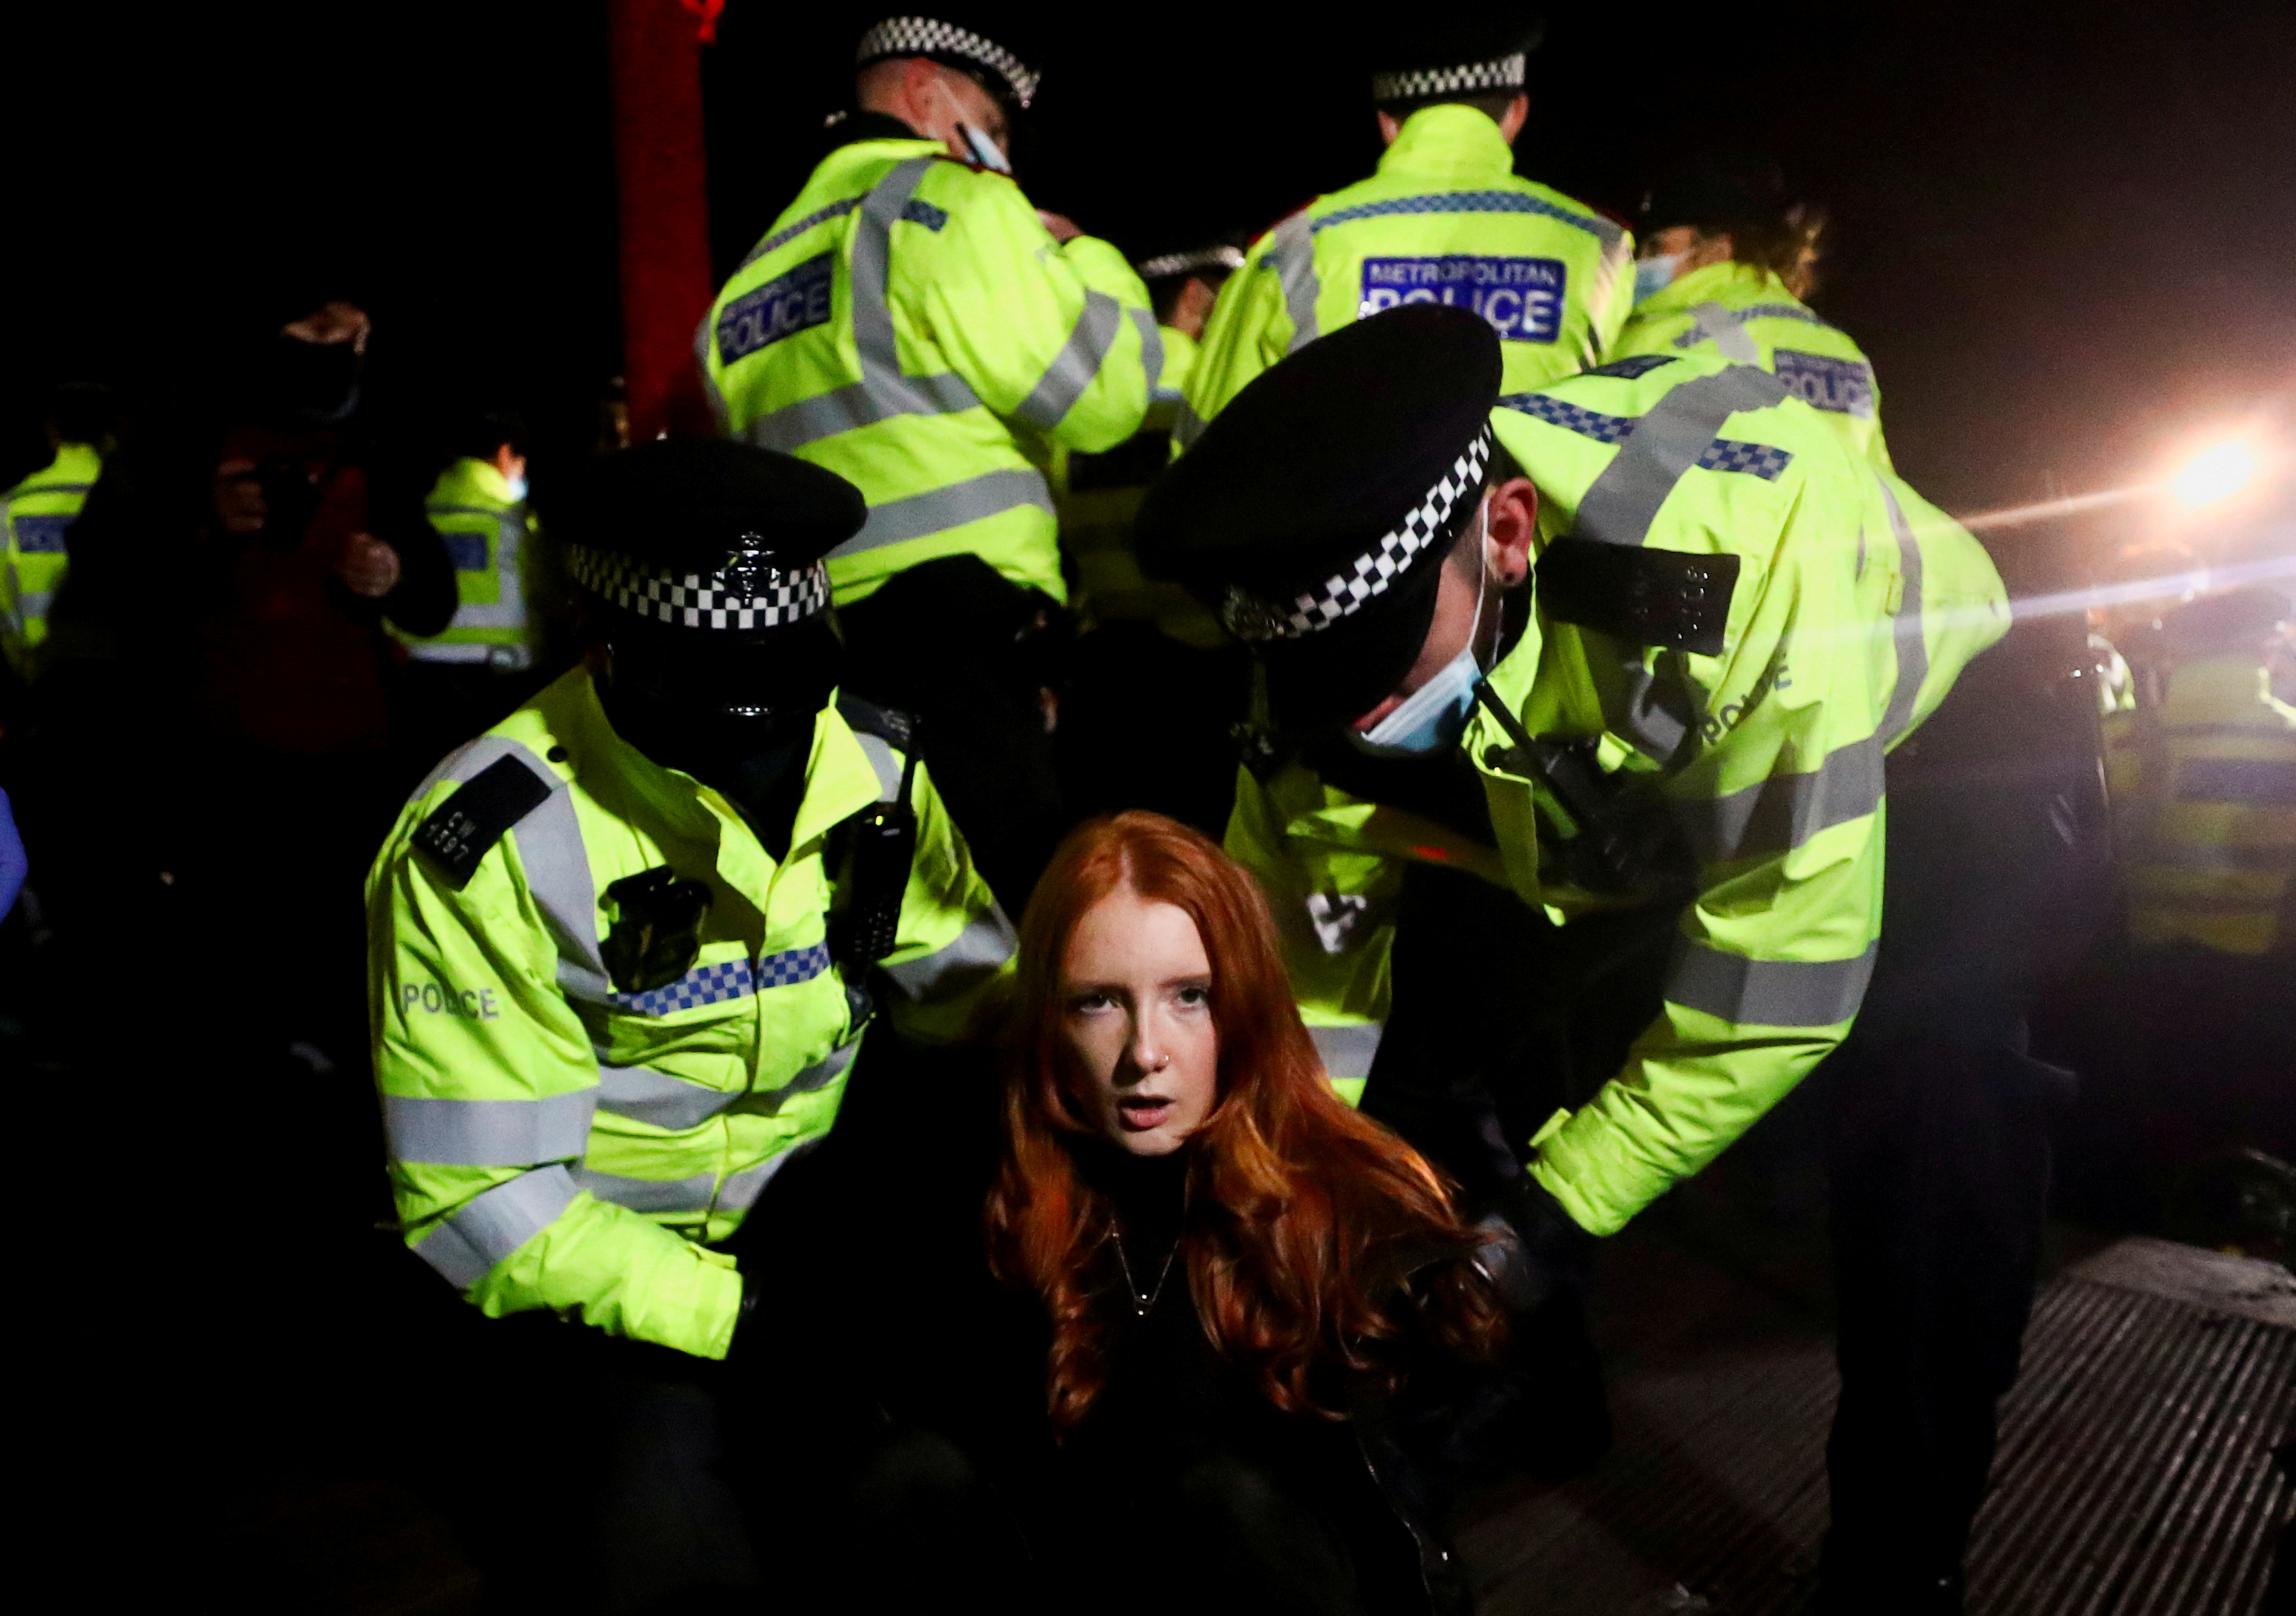 Police detain a woman as people gather at a memorial site in Clapham Common Bandstand, following the kidnap and murder of Sarah Everard, in London, Britain March 13, 2021. Reuters photographer Hannah McKay: "This photograph was taken following a vigil for Sarah Everard, a young woman whose kidnap and murder by a serving police officer in London a few days earlier unleashed a wave of revulsion in the United Kingdom. It shows a lone female protester, student Patsy Stevenson, being carted off by male police officers. It became an image that captured the national mood of anger at the insecurity women face in the United Kingdom and around the world. I had spent the day on Clapham Common where hundreds of people formed a ring around the bandstand where a minute's silence was held. As a small group of protestors began addressing the crowd, the police immediately arrived to break up the vigil due to coronavirus restrictions. As it got dark the atmosphere changed, going from a reflective emotional mood to a more angry one. Patsy was one of the last remaining people on the bandstand and was restrained face down on the floor with her hands behind her back. It was dark, there was lots of shouting and she was clearly distressed. This picture of her on the floor was taken minutes later once the situation had calmed slightly. I continued to shoot for another hour. It was only when I got home, looked at Twitter and saw the reactions to the protest that I realised how important that image had become. Within days the London police faced backlash for how they broke up the vigil and Everard's murder resonated with women around the world who have experienced violence and sexual assaults."   REUTERS/Hannah McKay/File Photo    SEARCH "POY STORIES 2021" FOR THIS STORY. SEARCH "WIDER IMAGE" FOR ALL STORIES   TPX IMAGES OF THE DAY